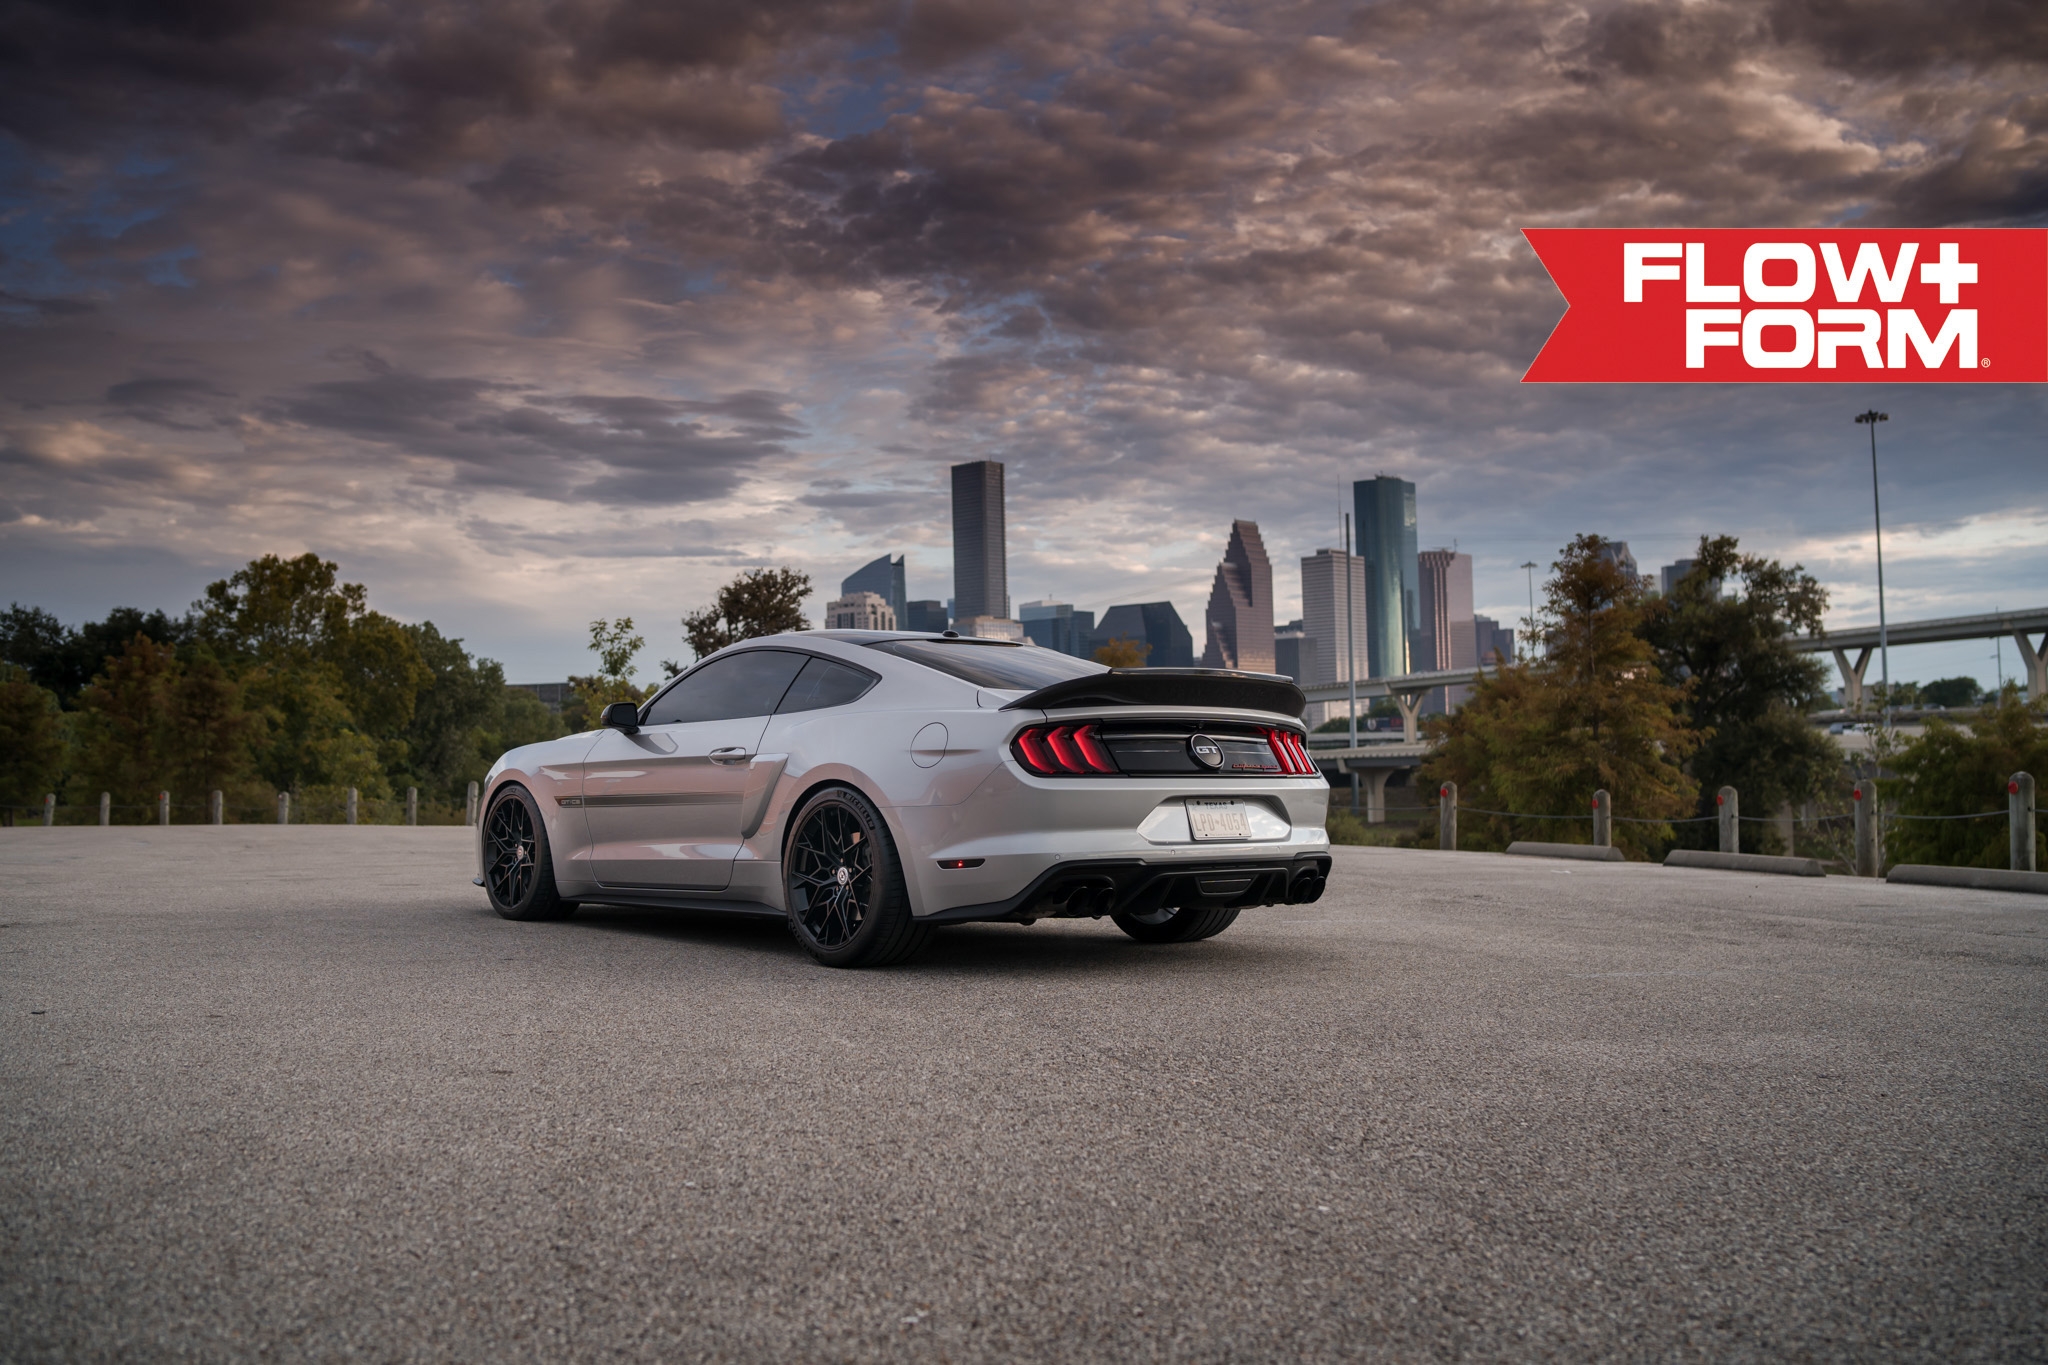 S650 Mustang UP TO $775 OFF on HRE Flow Form Wheels - HRE FF28 FF21 FF11 FF10 FF04 - Vibe Motorsports 3